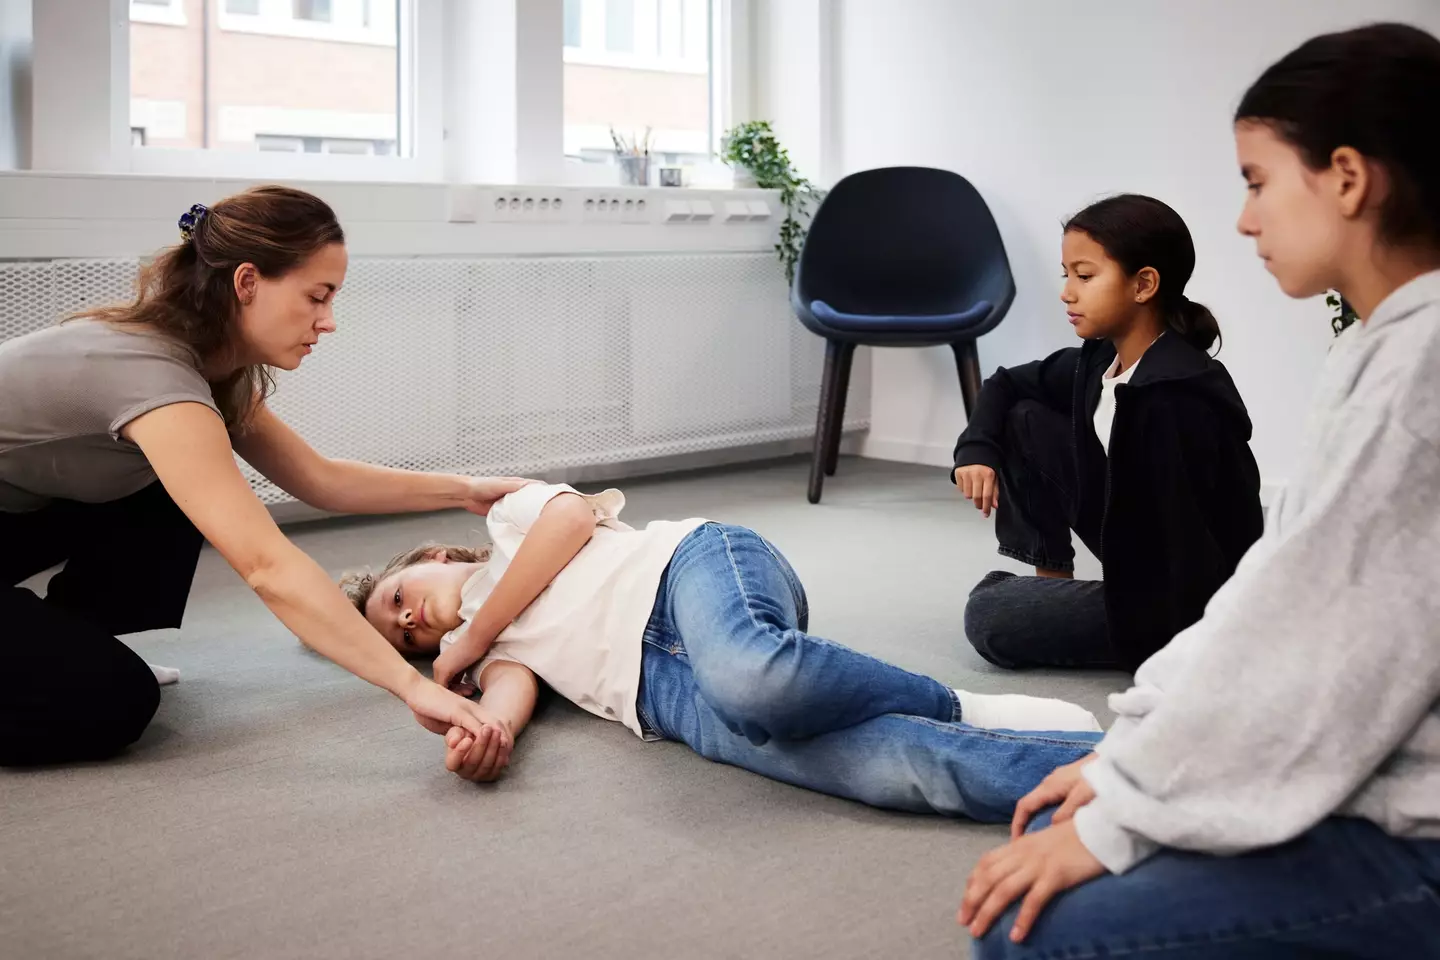 You may need to know how to put someone in the recovery position. (Getty Stock Photo)